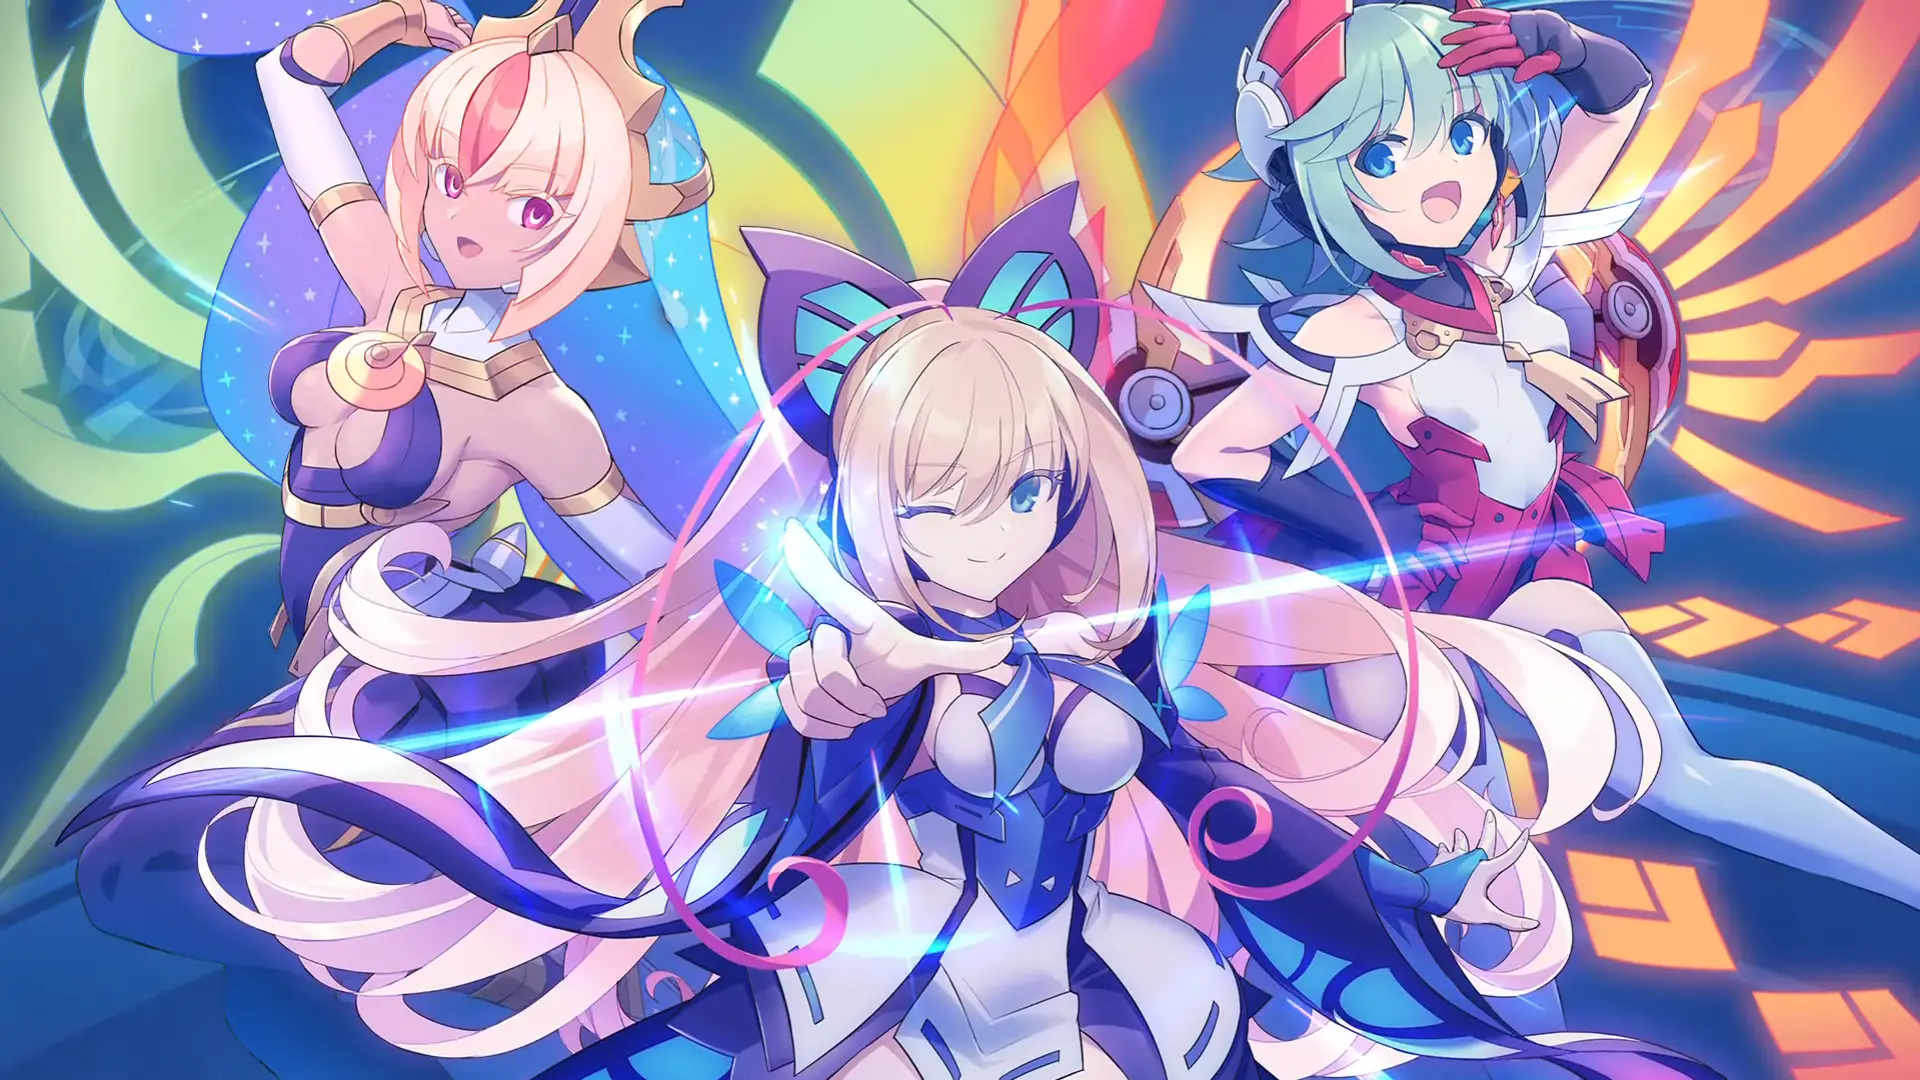 GUNVOLT RECORDS Cychronicle Shares New Music Video, “Melodic Wings”